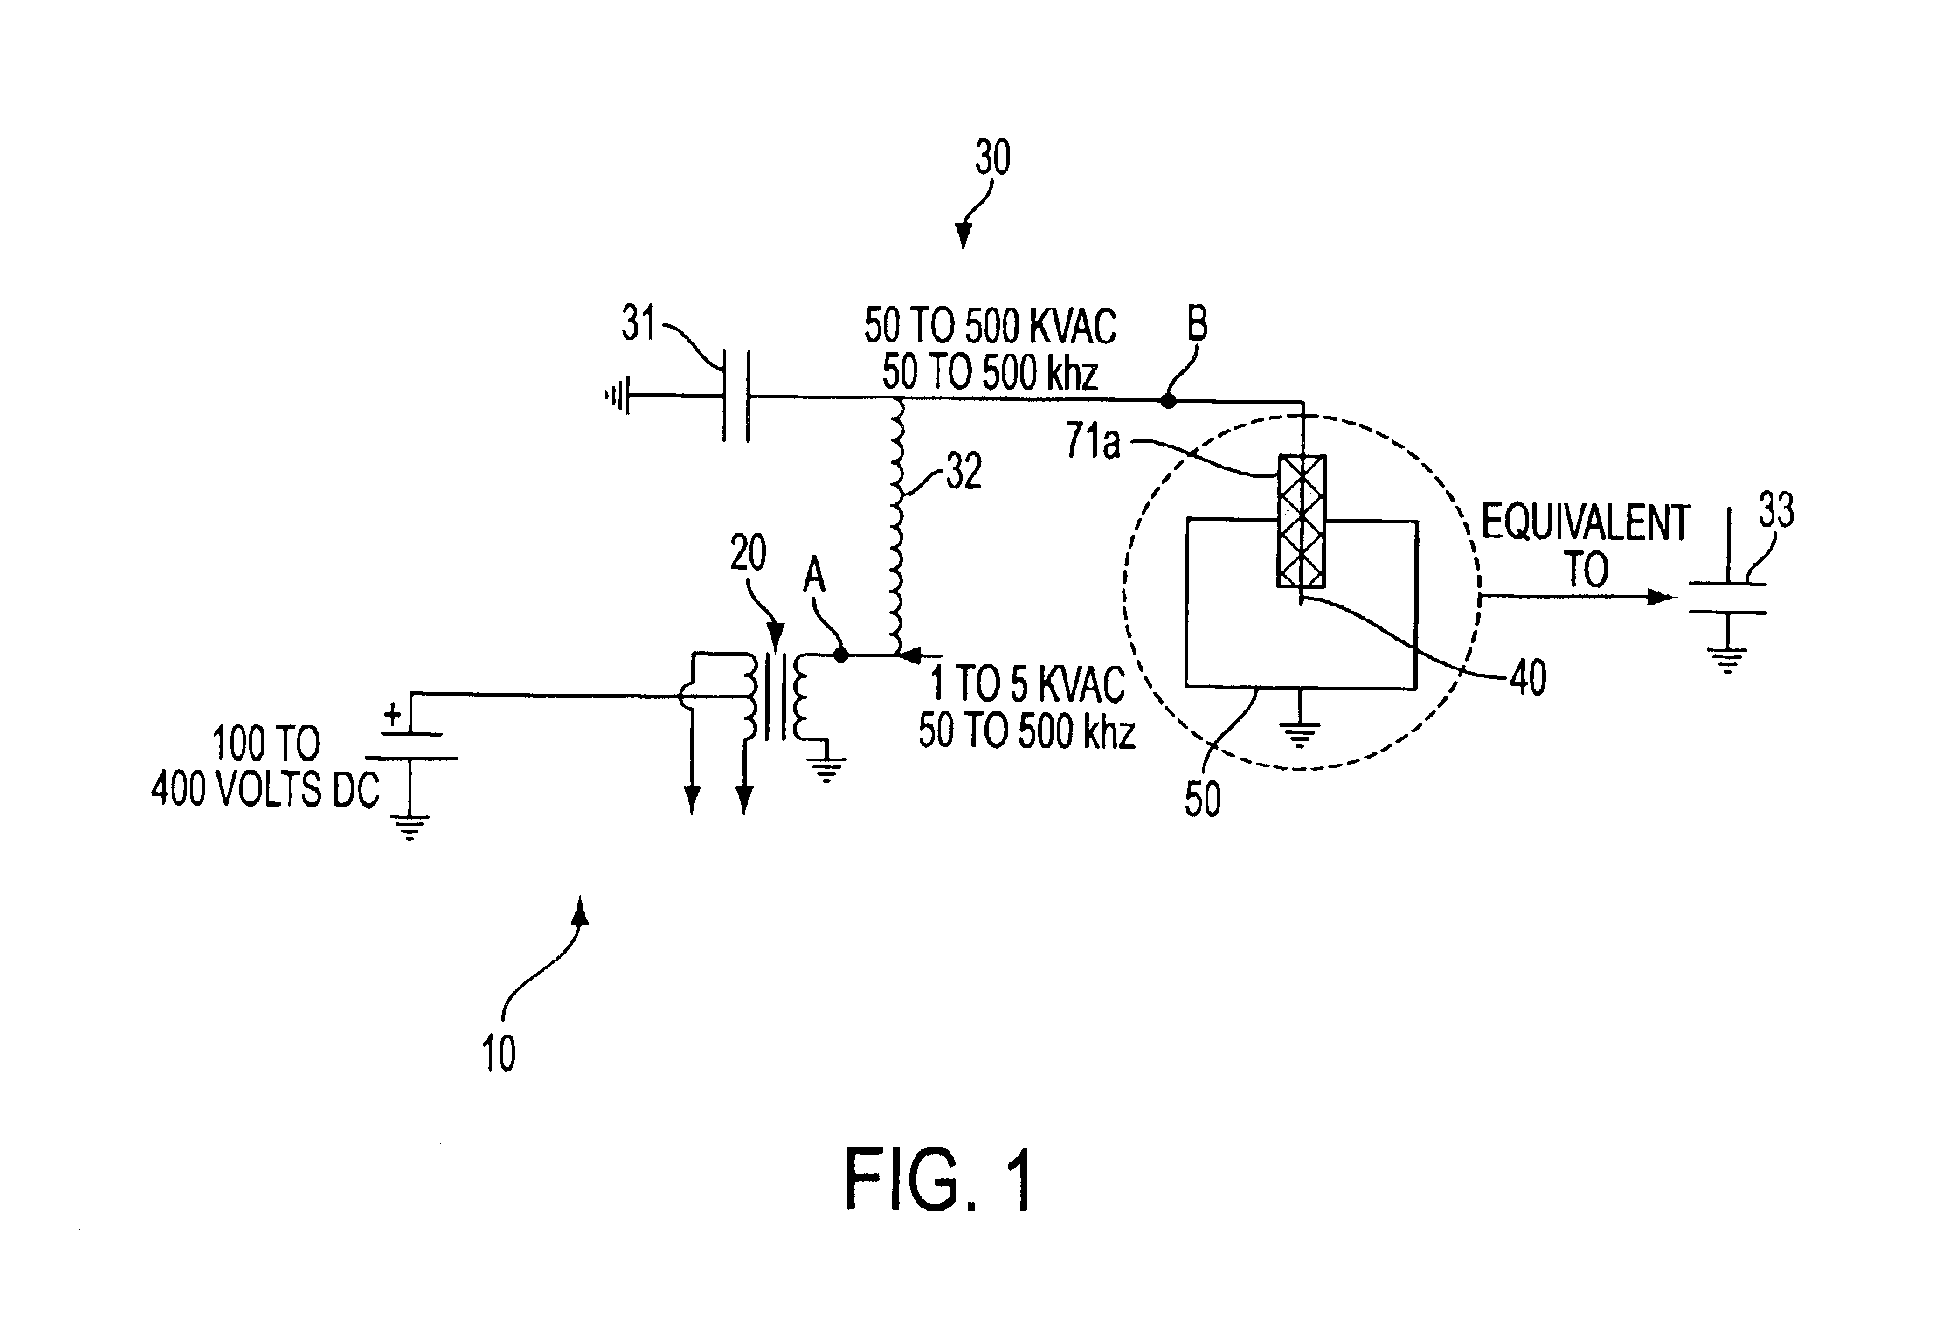 System and method for generating and sustaining a corona electric discharge for igniting a combustible gaseous mixture